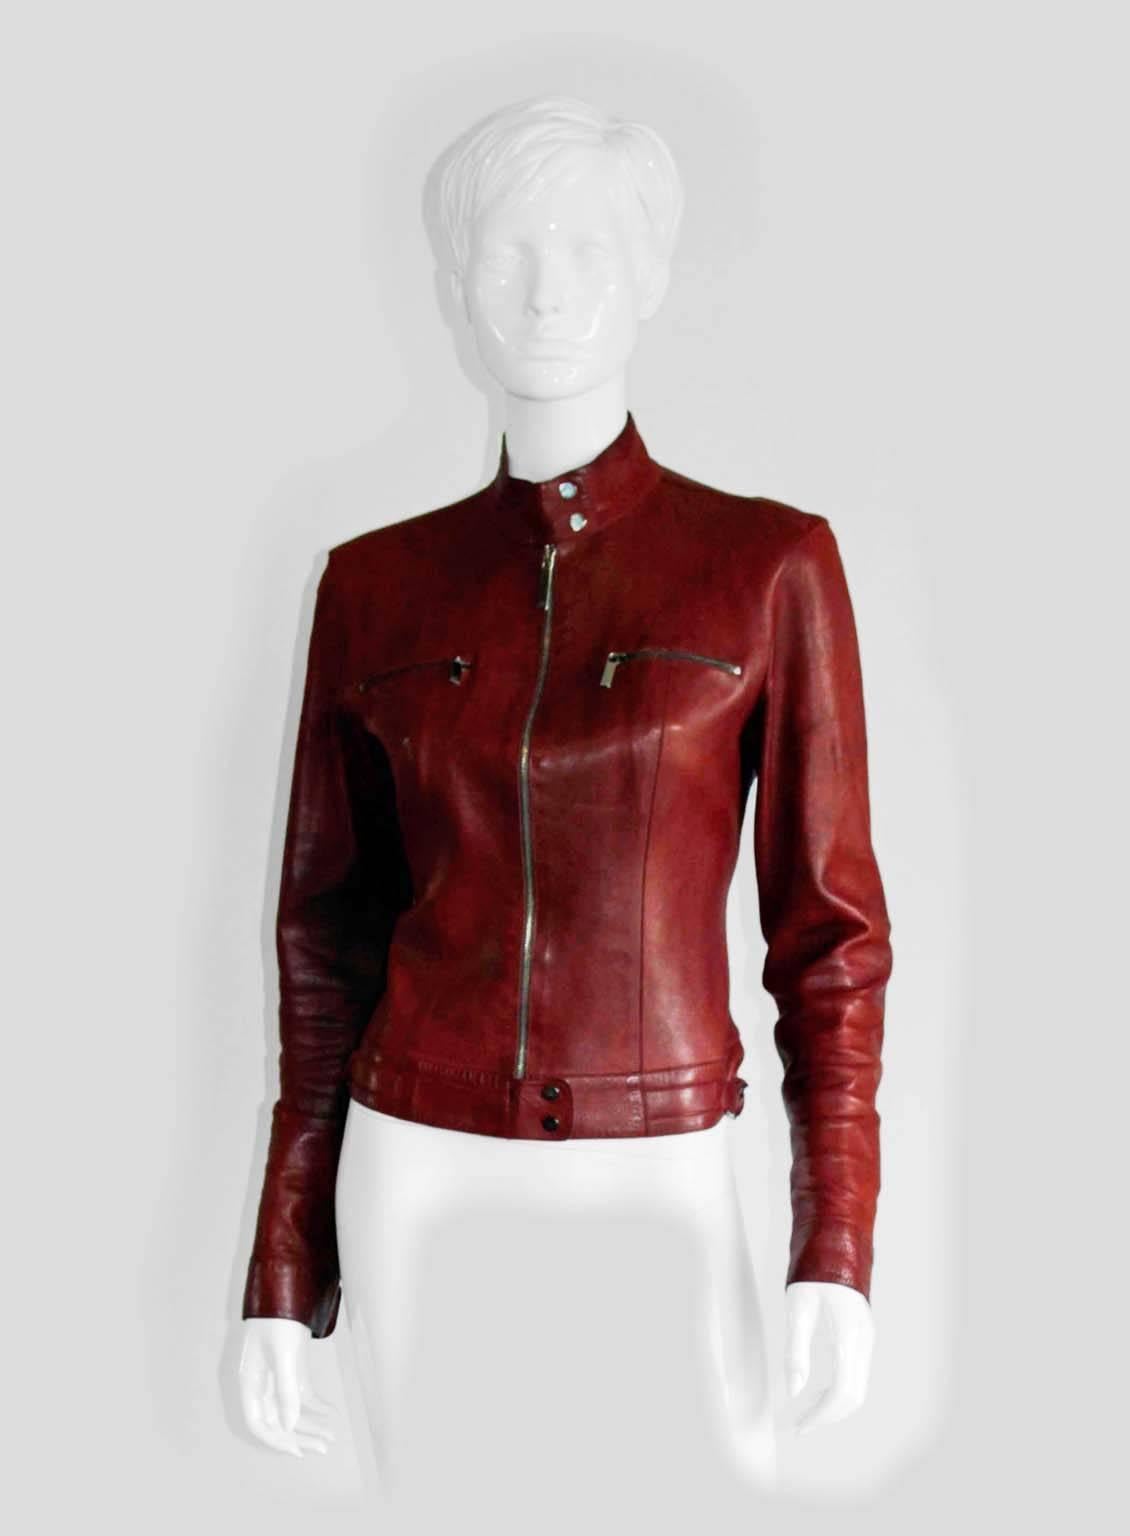 That Dreamy Boho-Chic Maroon Red Moto Jacket That Utterly Stole The Tom Ford For Gucci Spring Summer 1999 Runway Show!

That Runway Who could ever forget all of those heavenly red jackets, pants, boots, belts & bags from Tom Ford's incredible